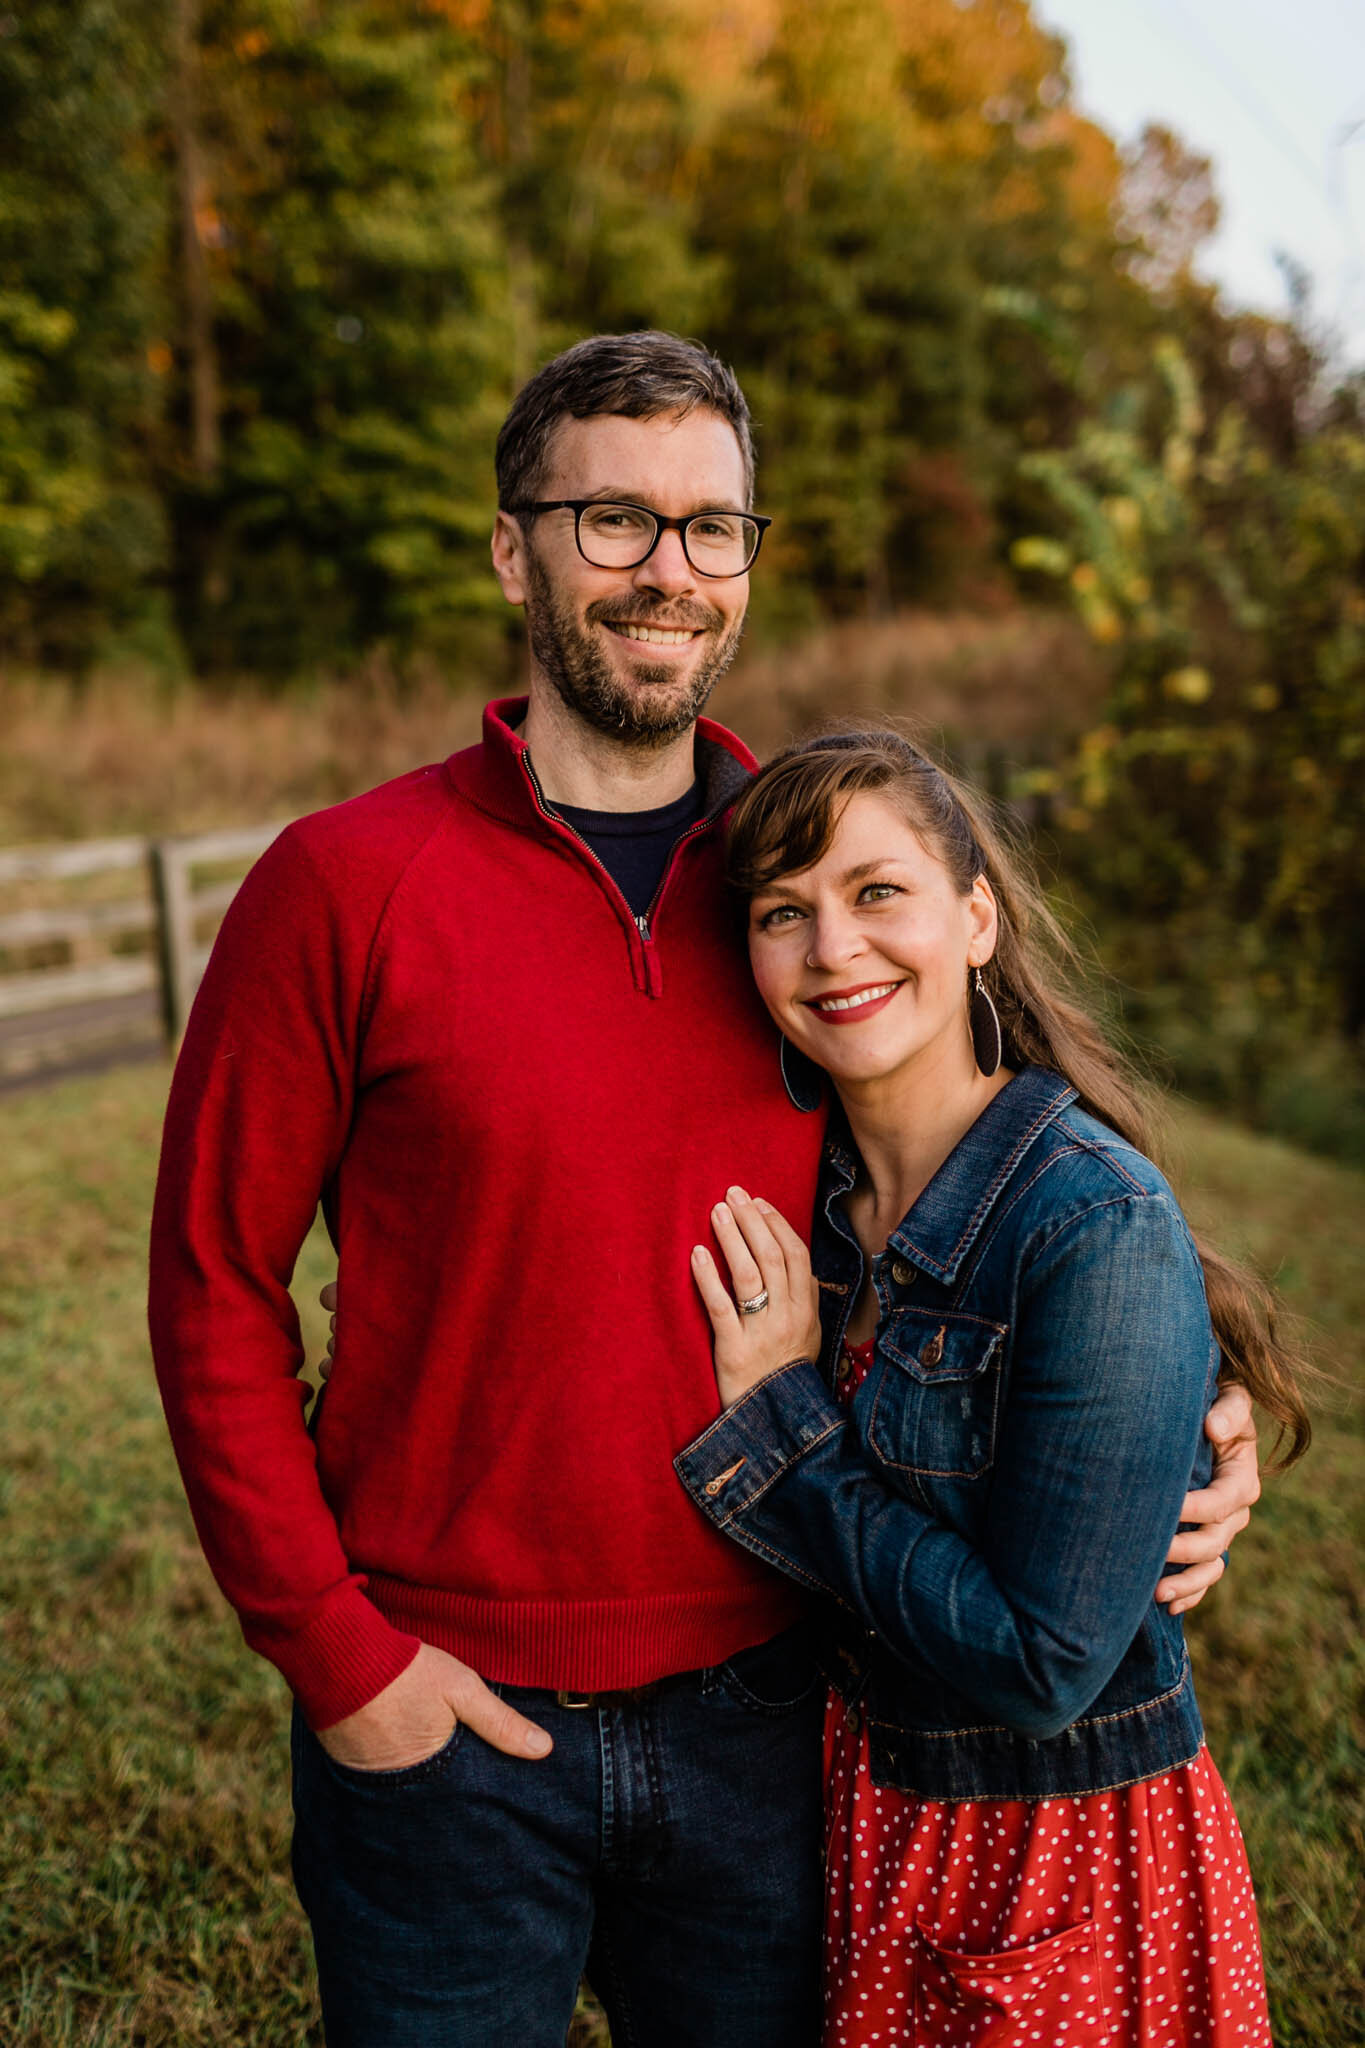 Raleigh Family Photographer | By G. Lin Photography | Umstead Park | Husband and wife portrait smiling 